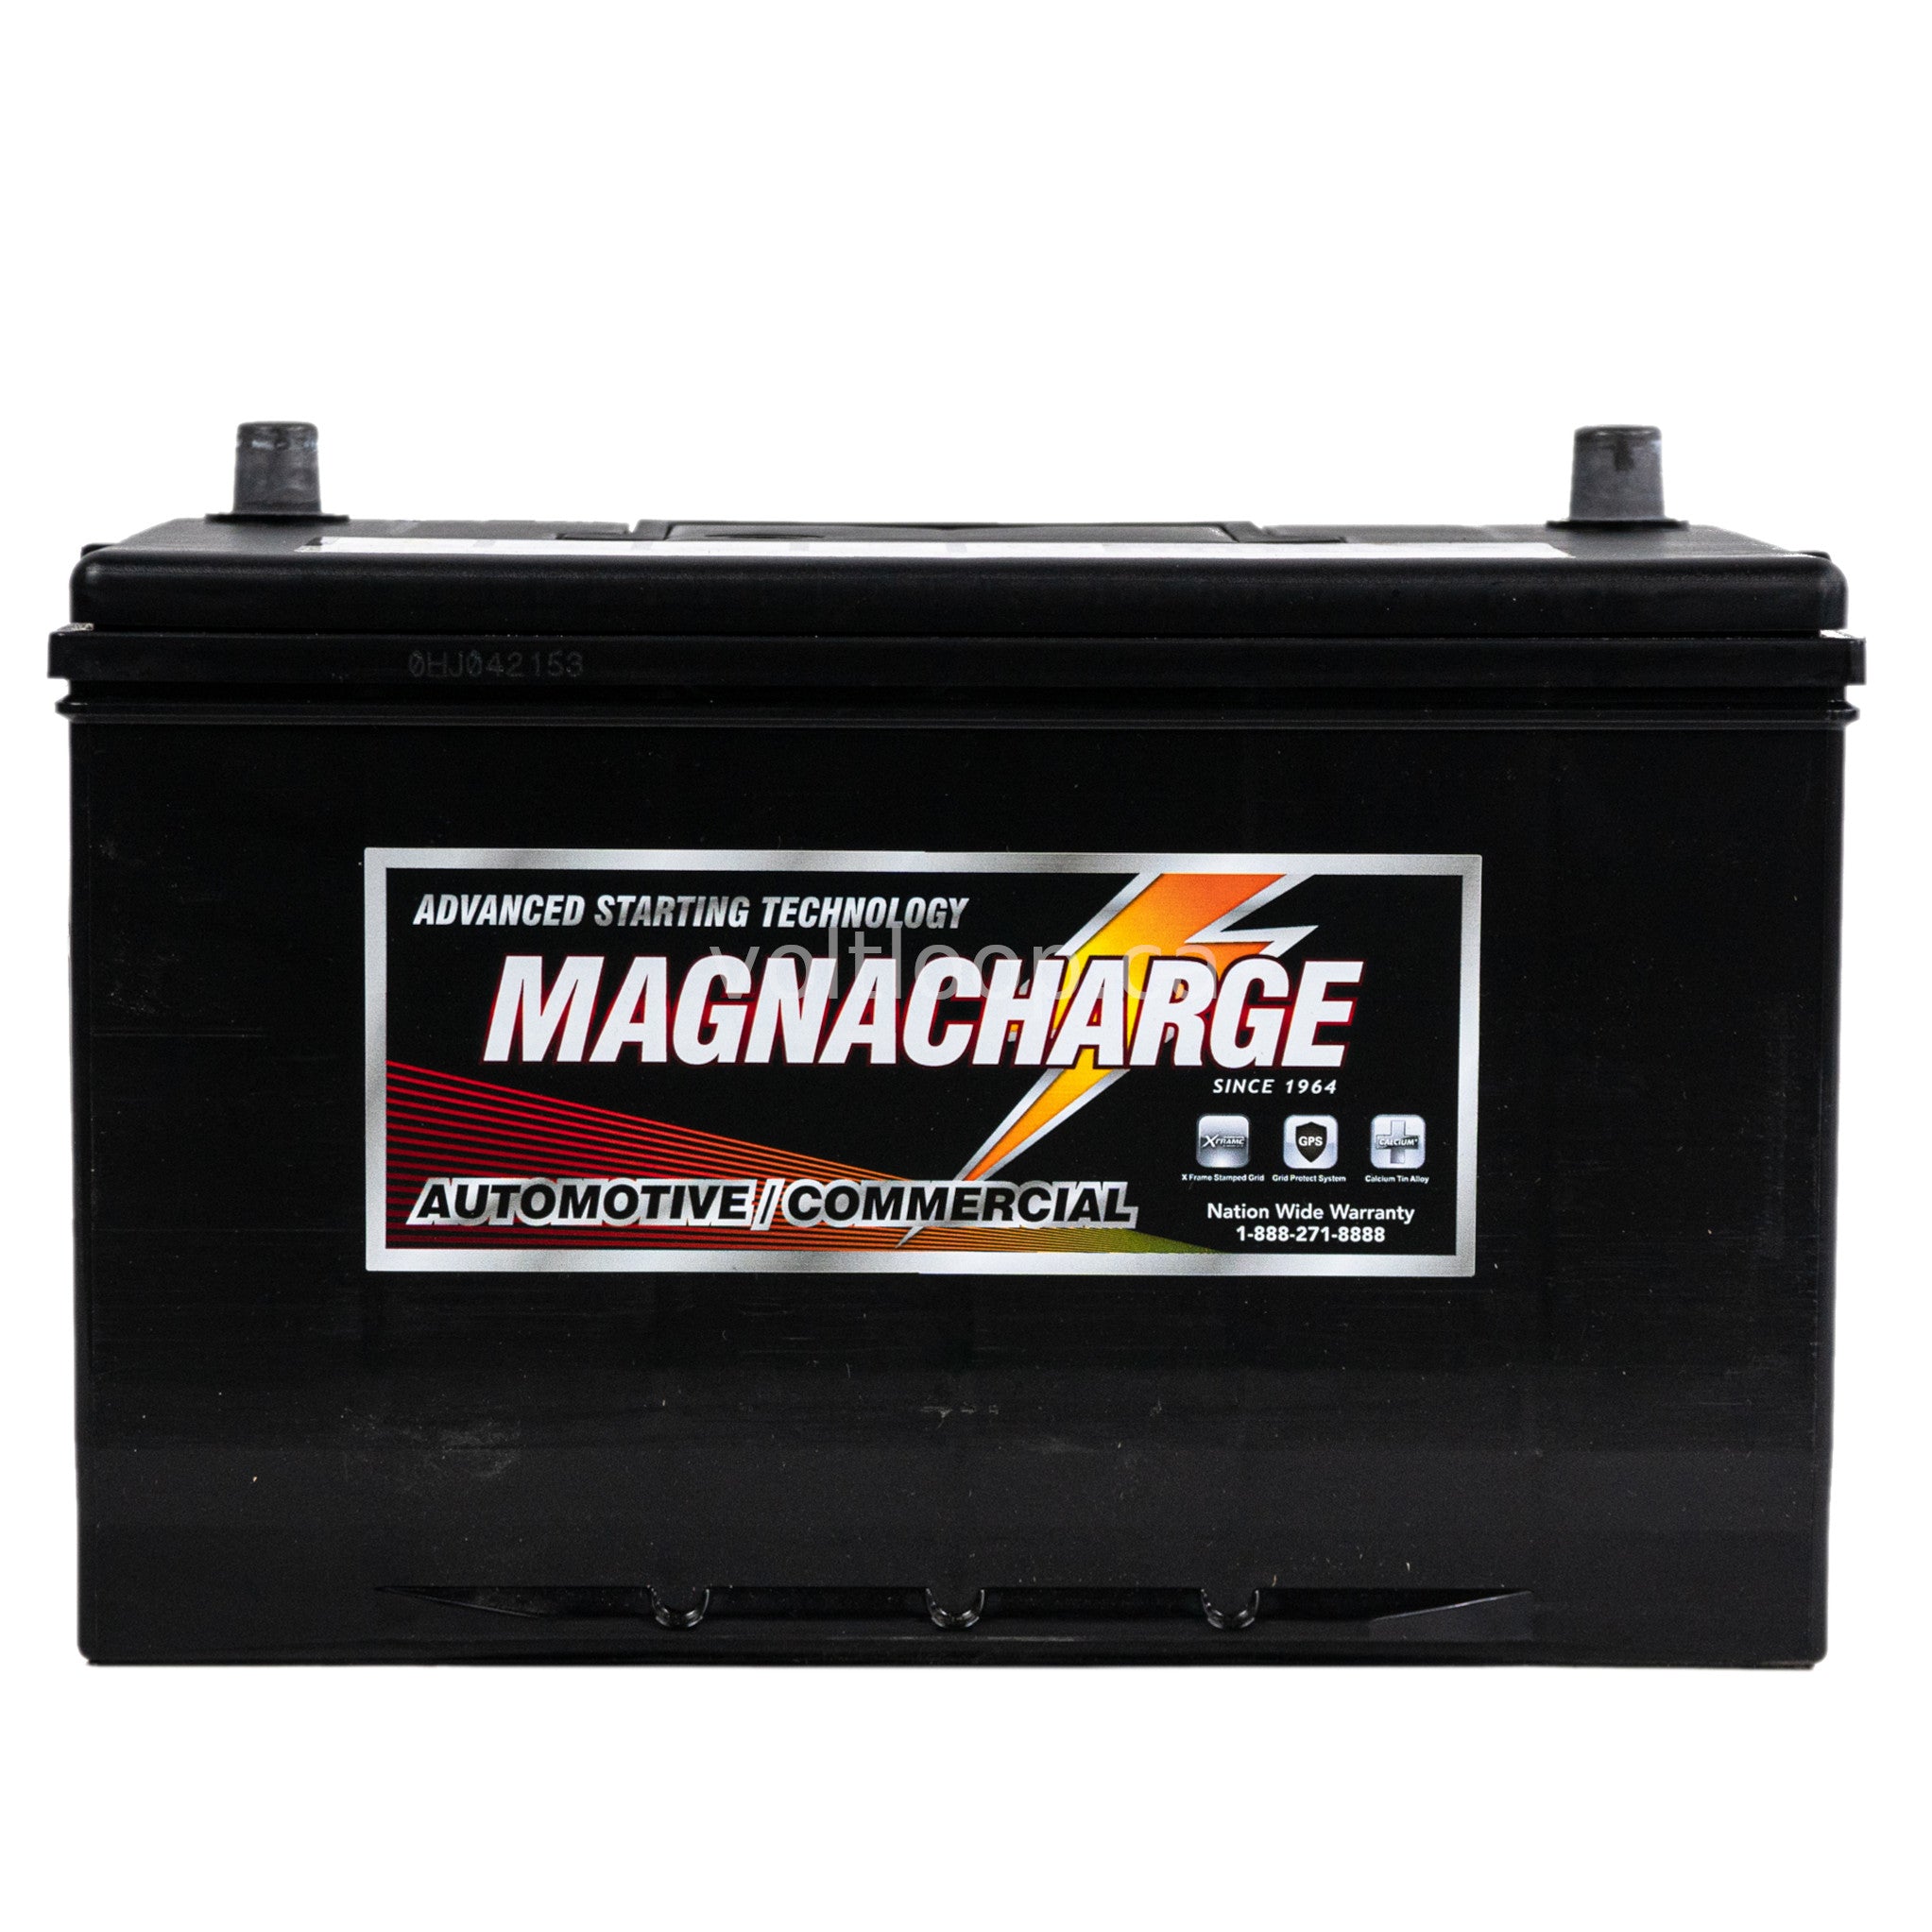 Magnacharge 30H-850 Group 30H Truck Battery